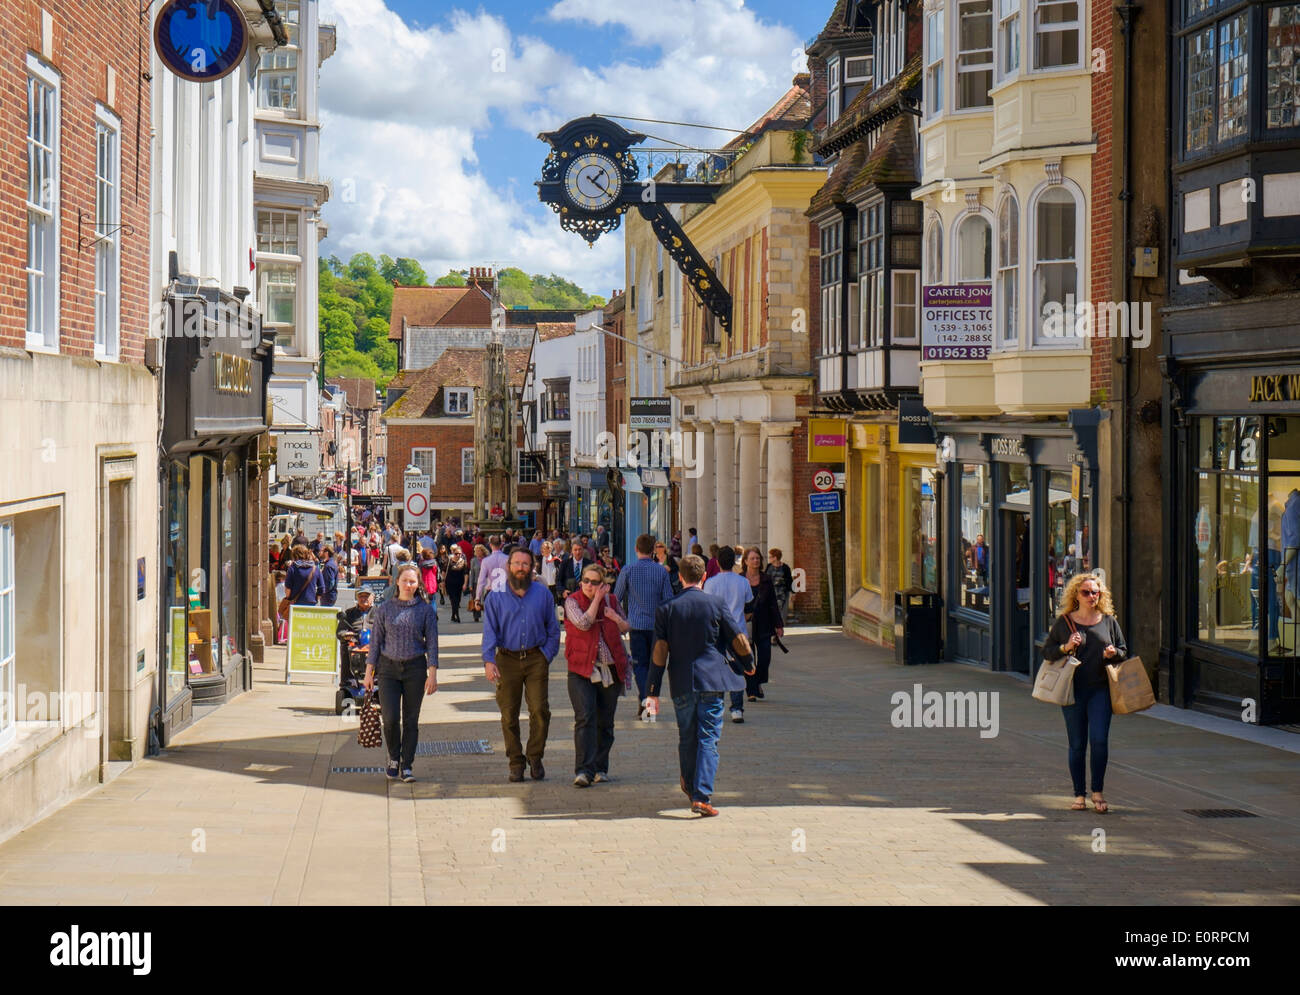 Winchester, Hampshire, England, UK - The High Street with town clock and stores Stock Photo